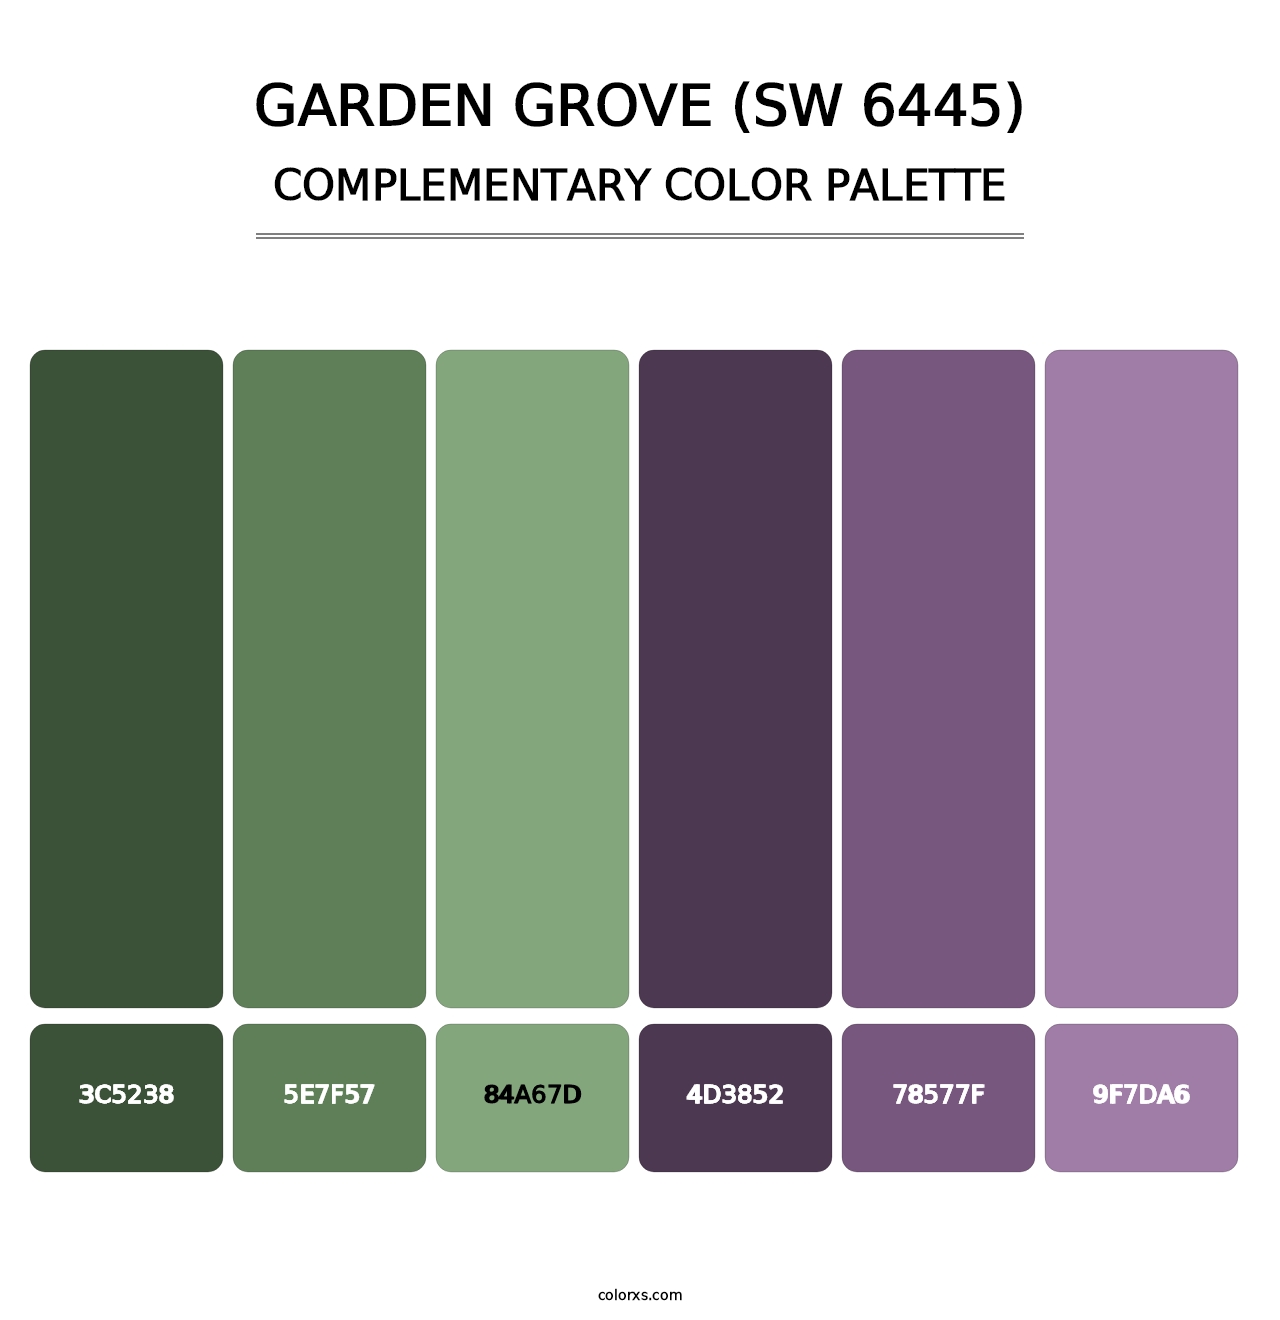 Garden Grove (SW 6445) - Complementary Color Palette